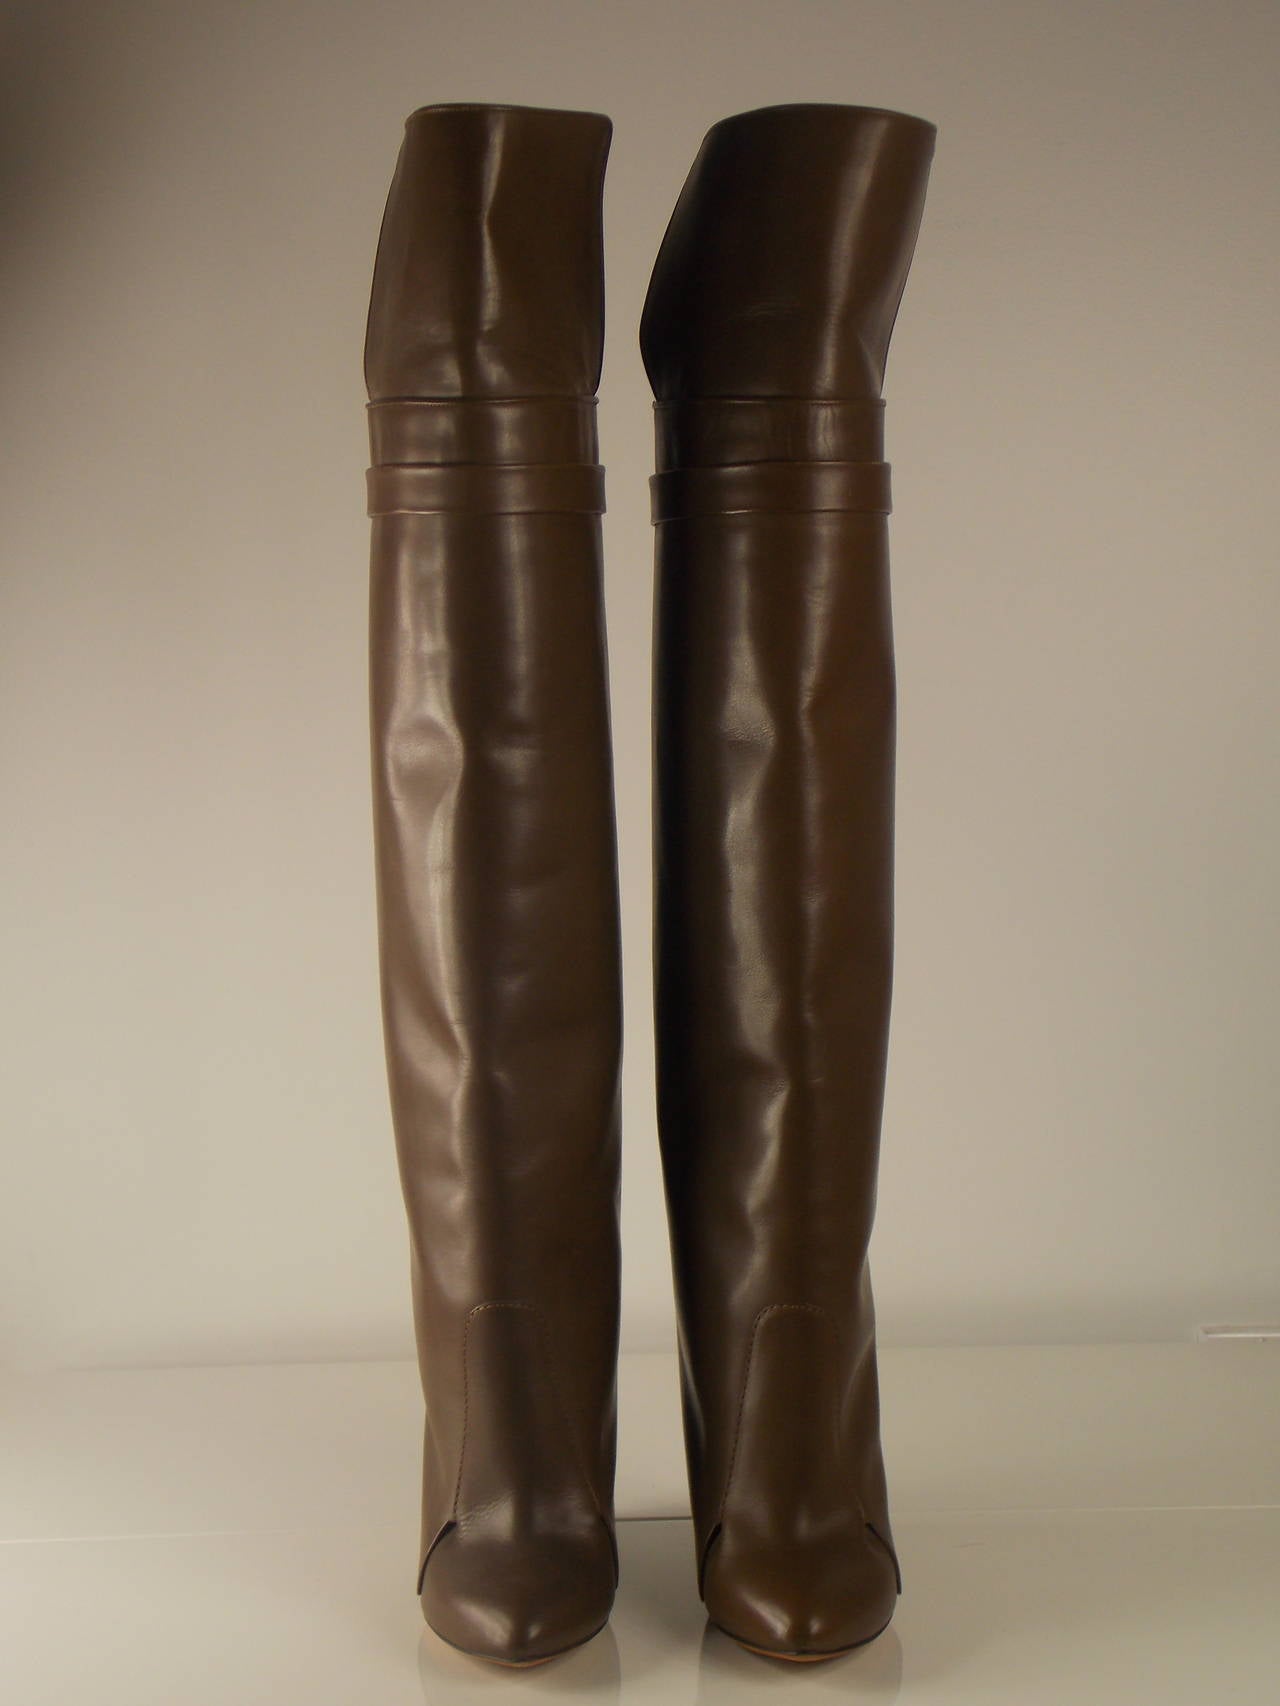 Authentic GiVENCHY knee boots.  Leather-covered and lacquered wood-effect wedge heel measures approximately 115mm / 4.5 inches, Brown leather (Calf), Mocha overlay with extended front panel and strap around top, pointed toe.